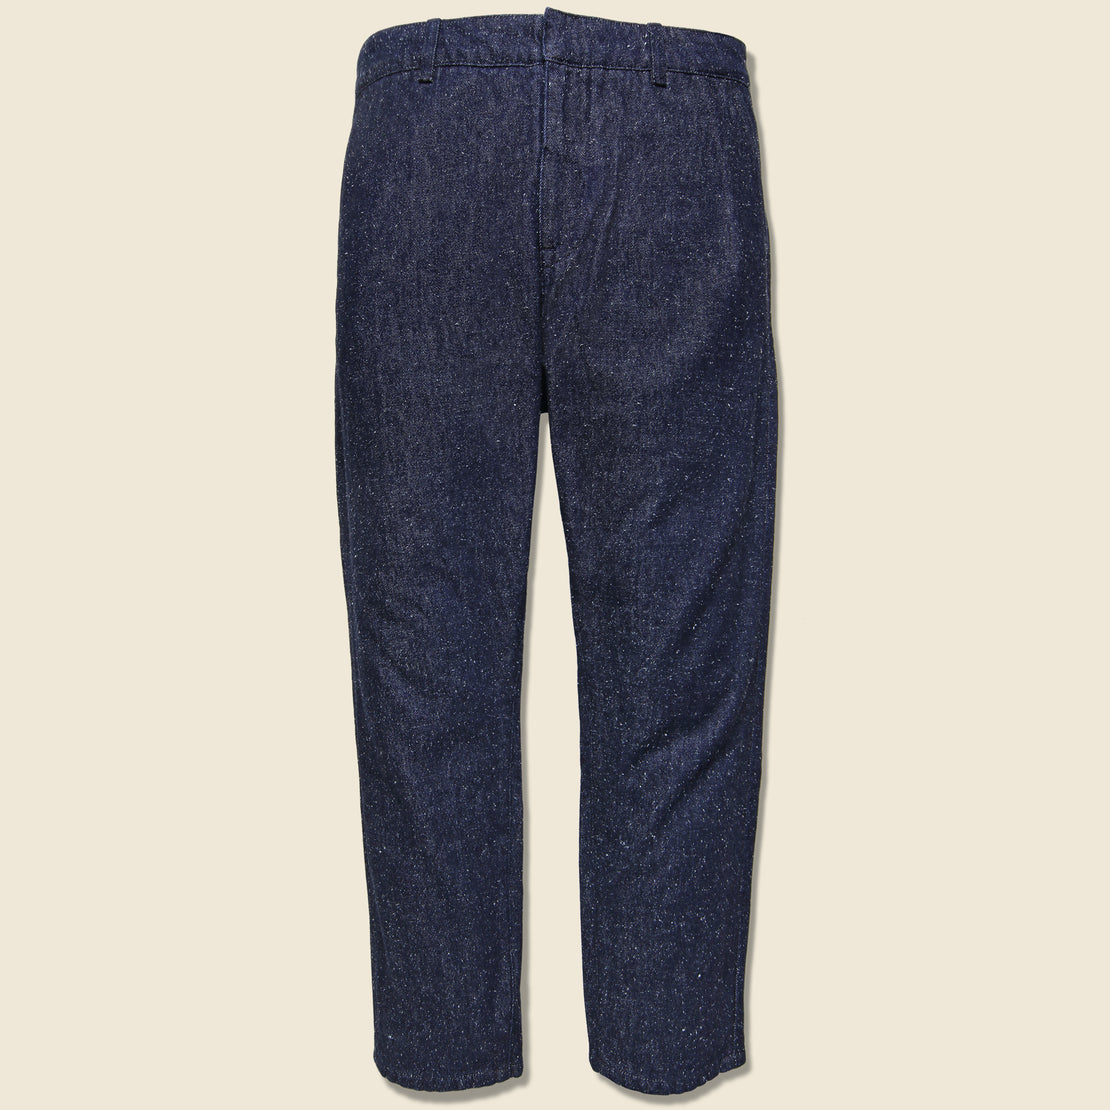 Levis Made & Crafted Taper Trouser - Neppy Denim